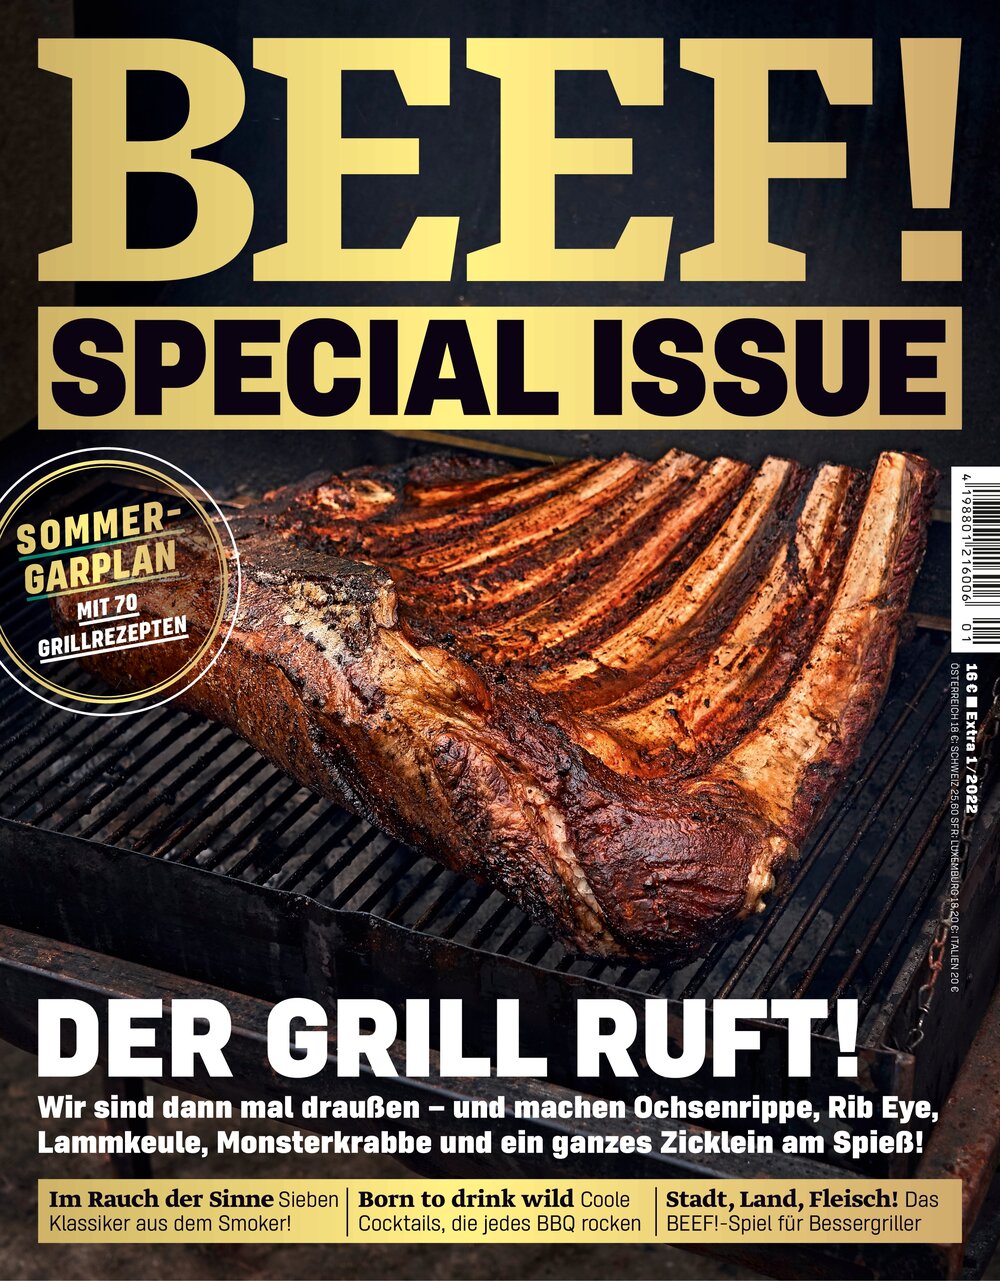 BEEF! Special Issue ePaper 01/2022